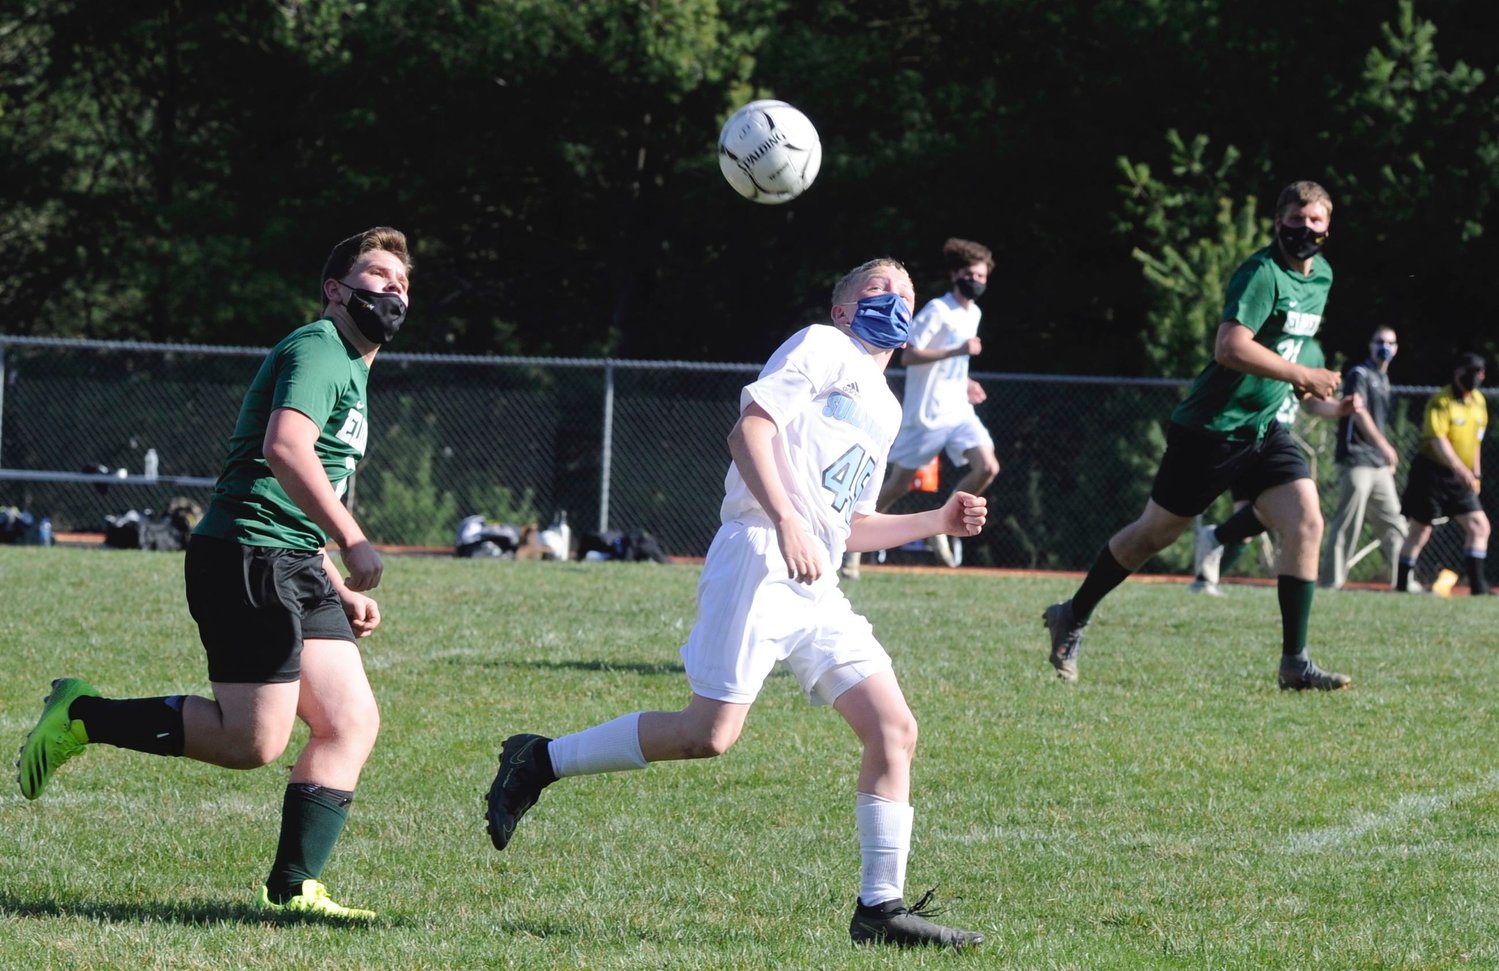 Aeronautics. Eldred’s Ethan Willams and Sullivan West’s Austin Nystrom have their eyes on the ball.